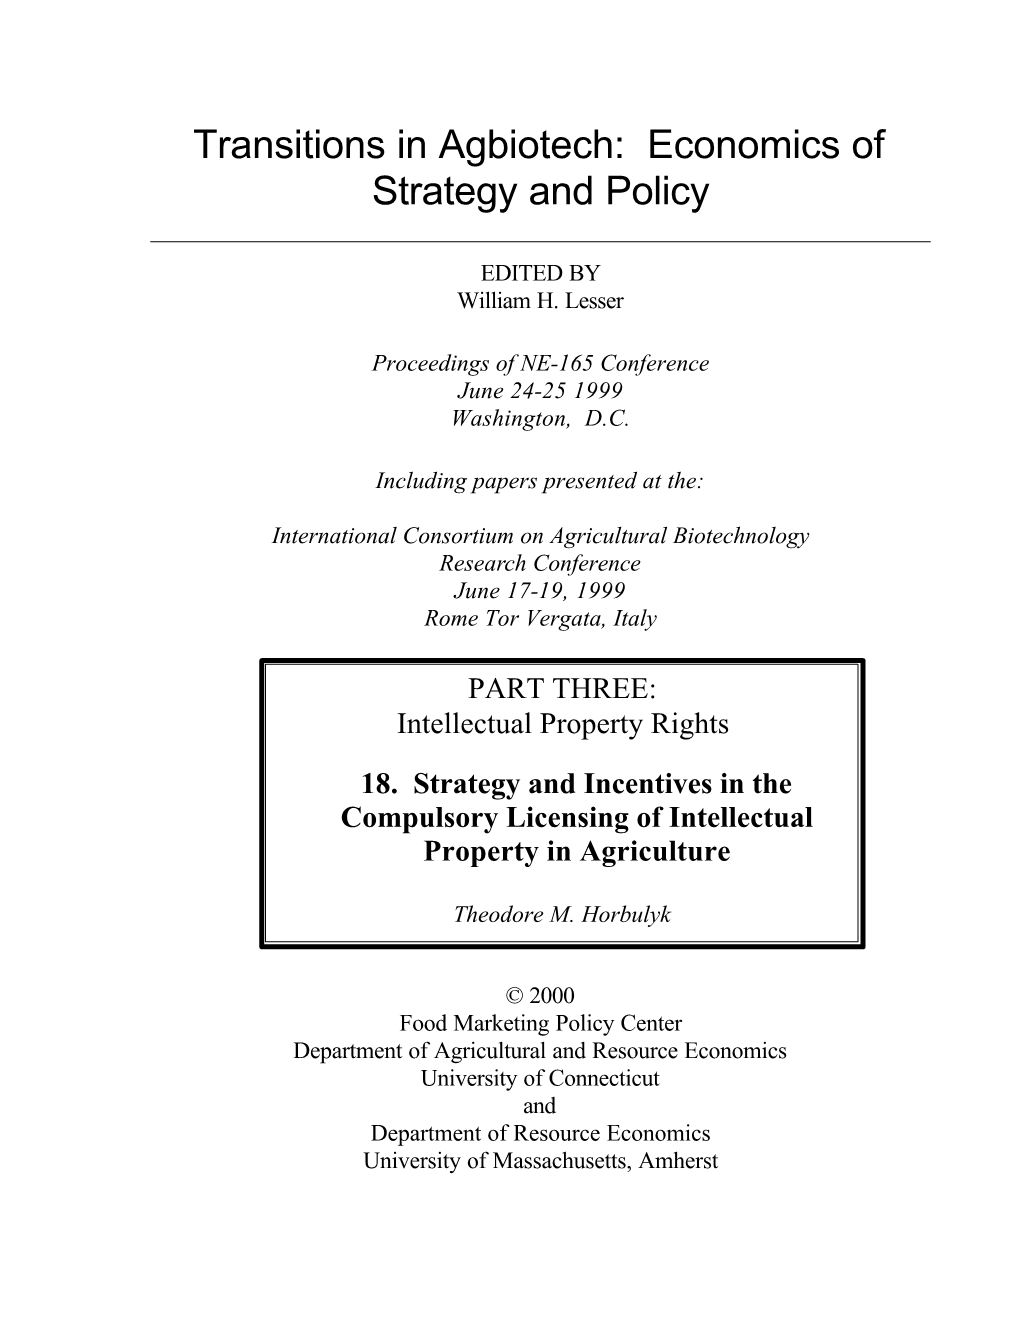 Transitions in Agbiotech: Economics of Strategy and Policy